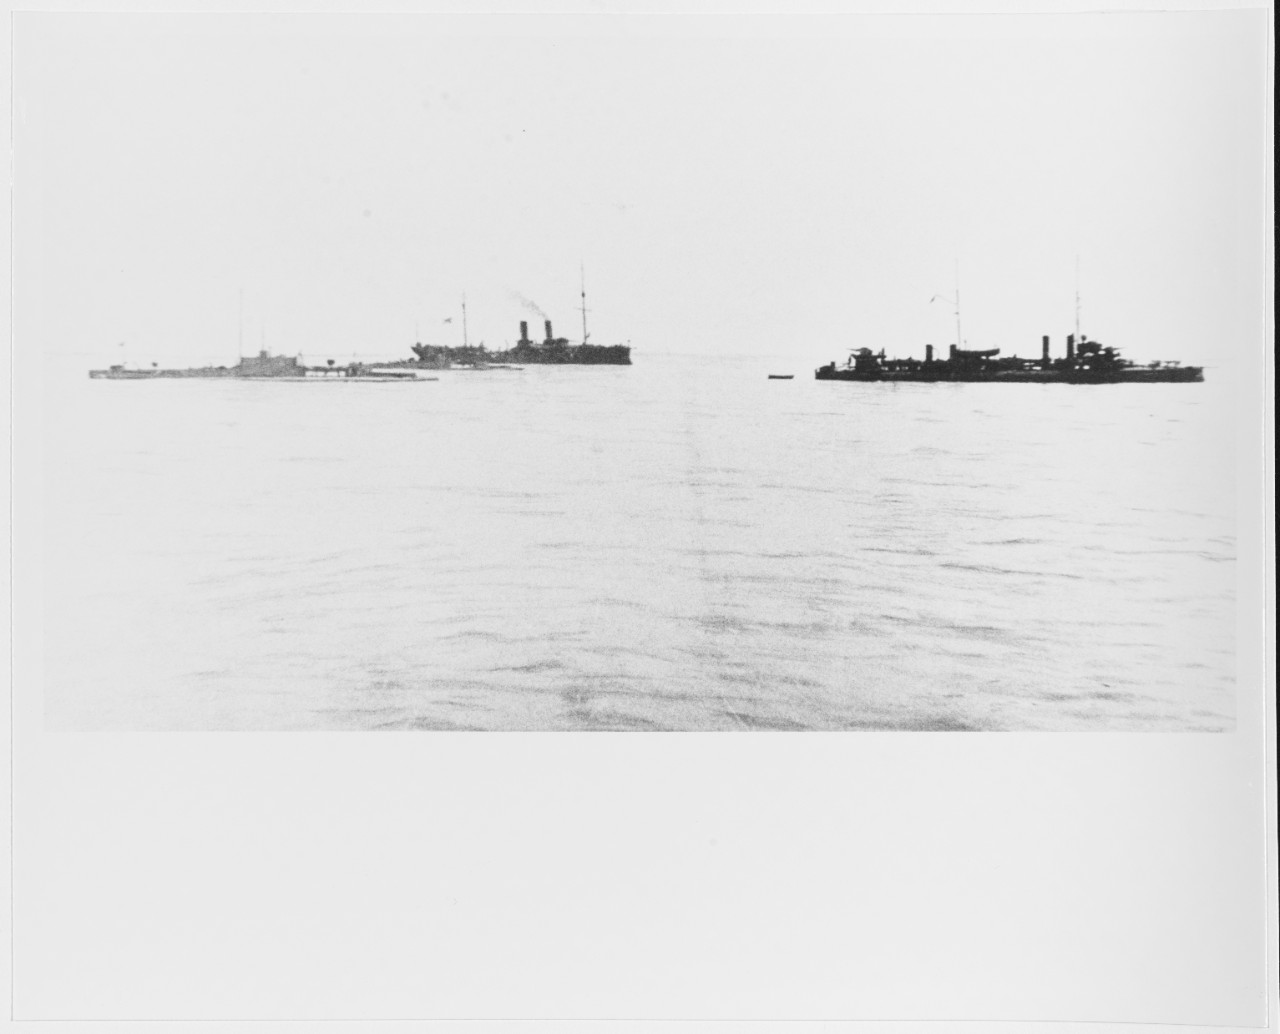 Russian warships in the Baltic Sea in 1916